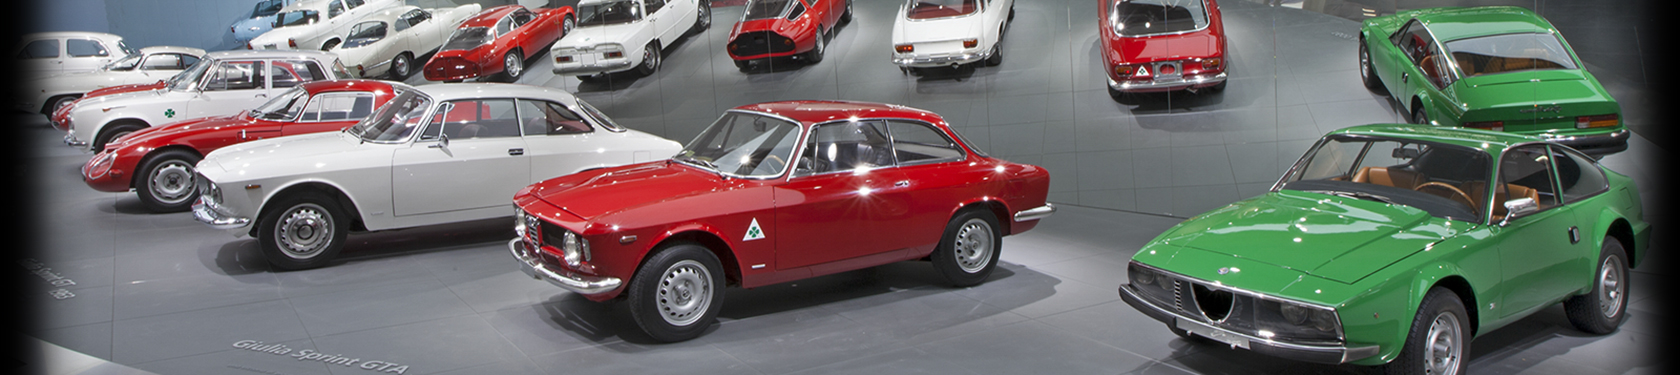 Photo of the Beauty cars in the Alfa Romeo museum